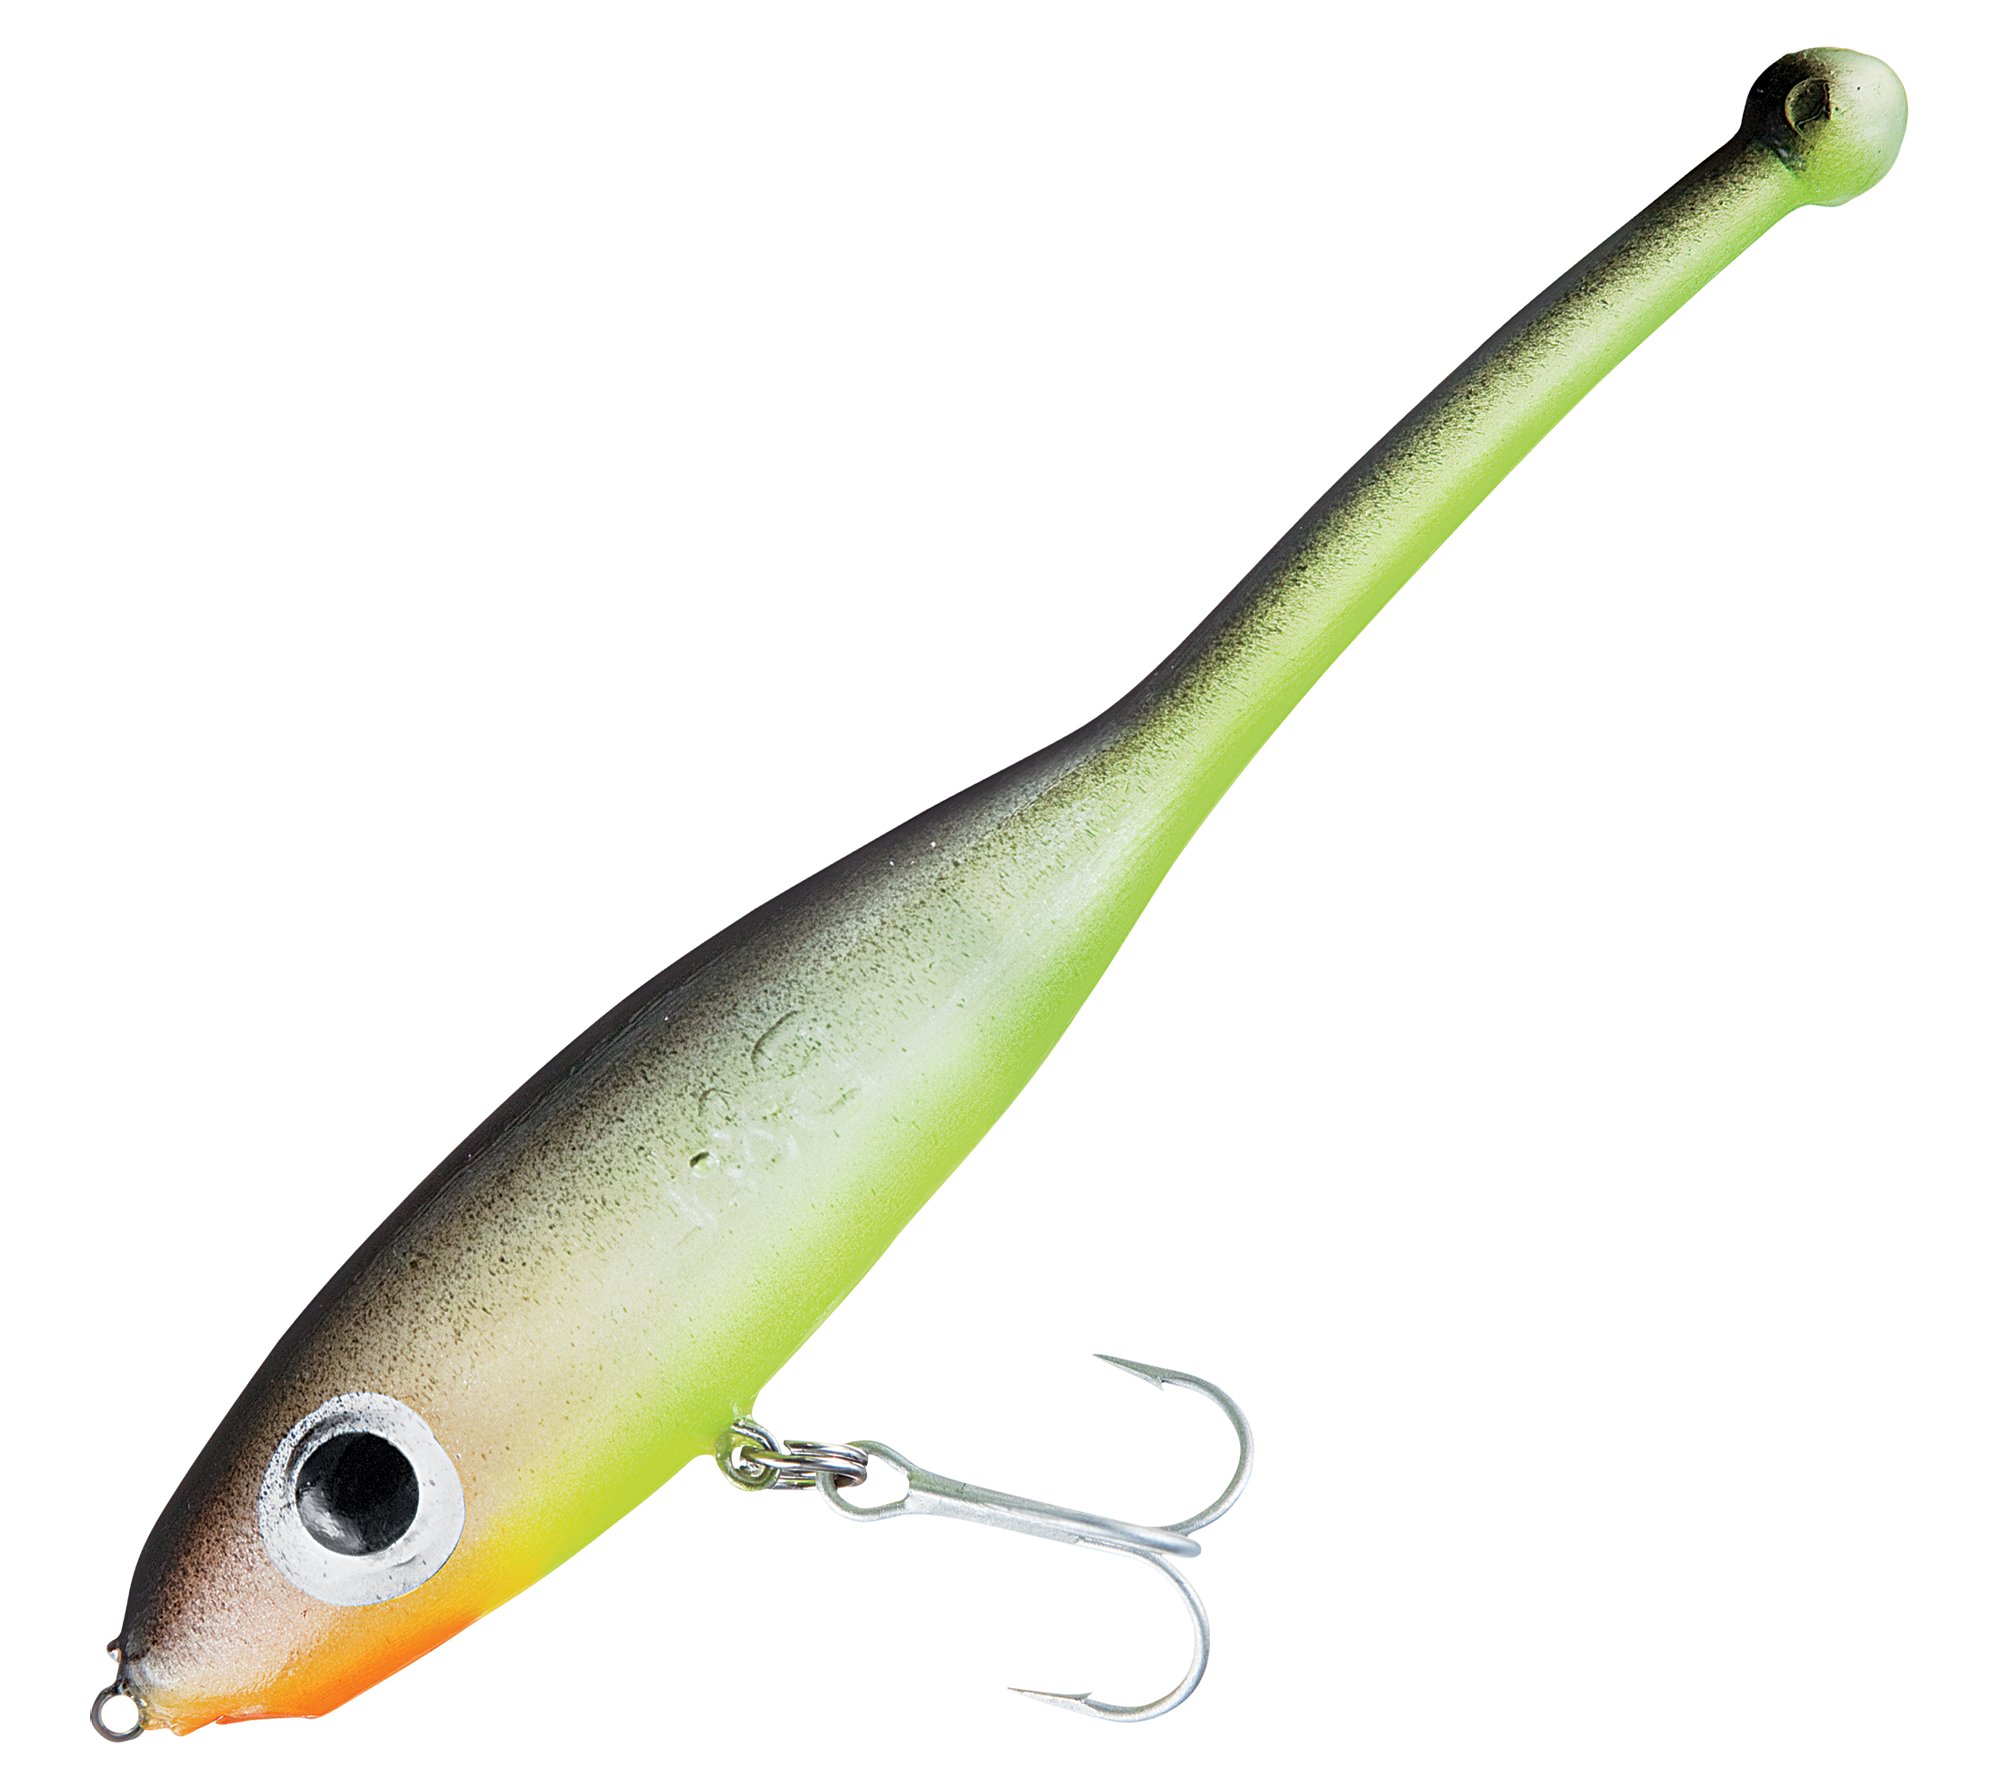 Paul Brown's Devil Soft Baits - Black Back/Pearl Chartreuse Belly